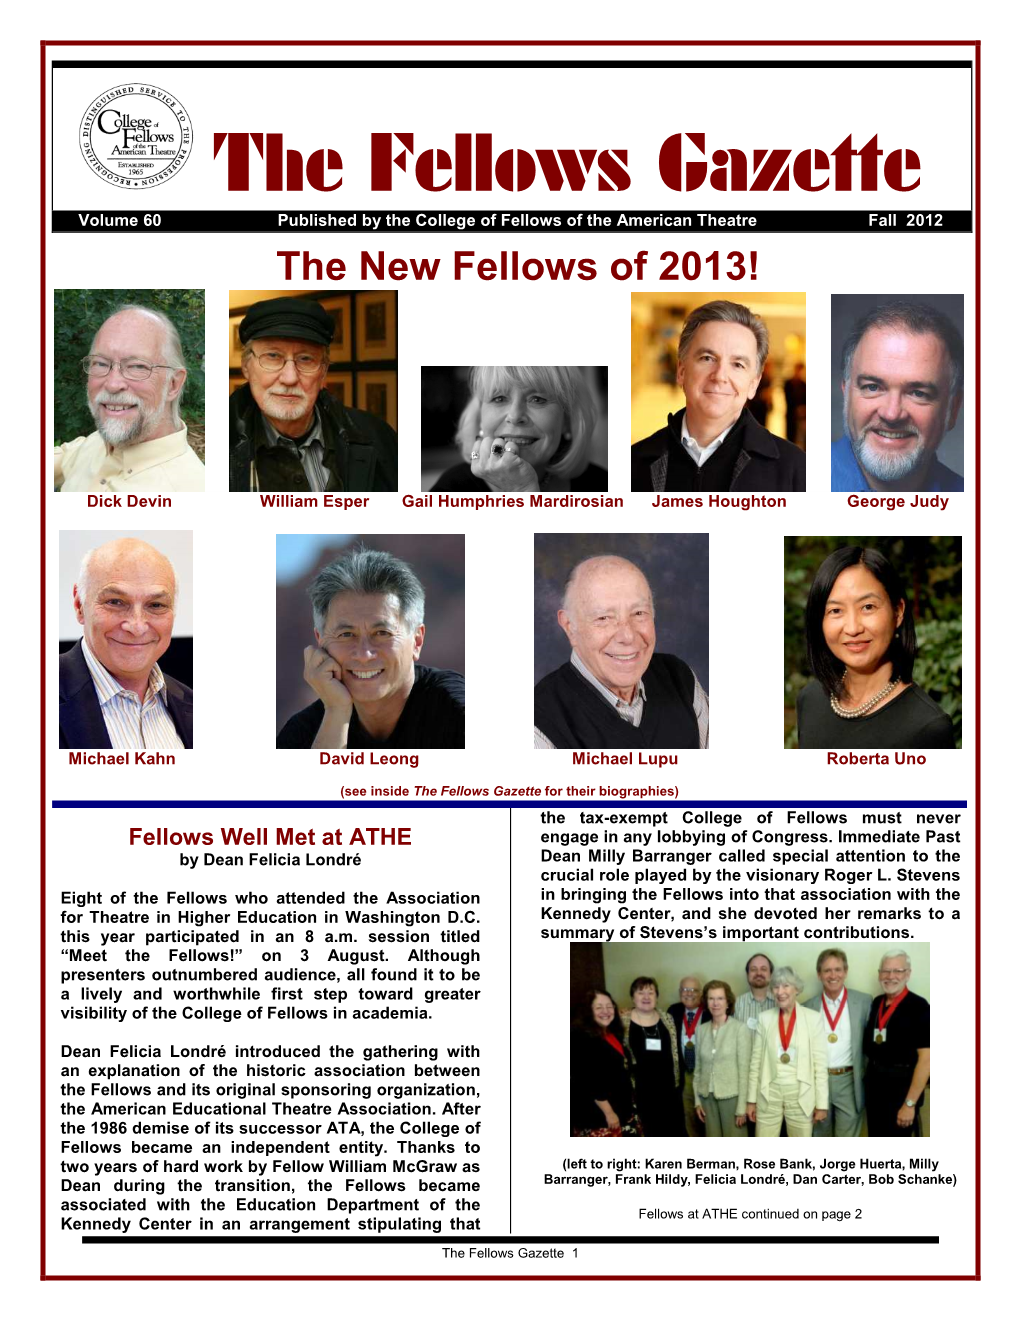 The Fellows Gazette Volume 60 Published by the College of Fellows of the American Theatre Fall 2012 the New Fellows of 2013!